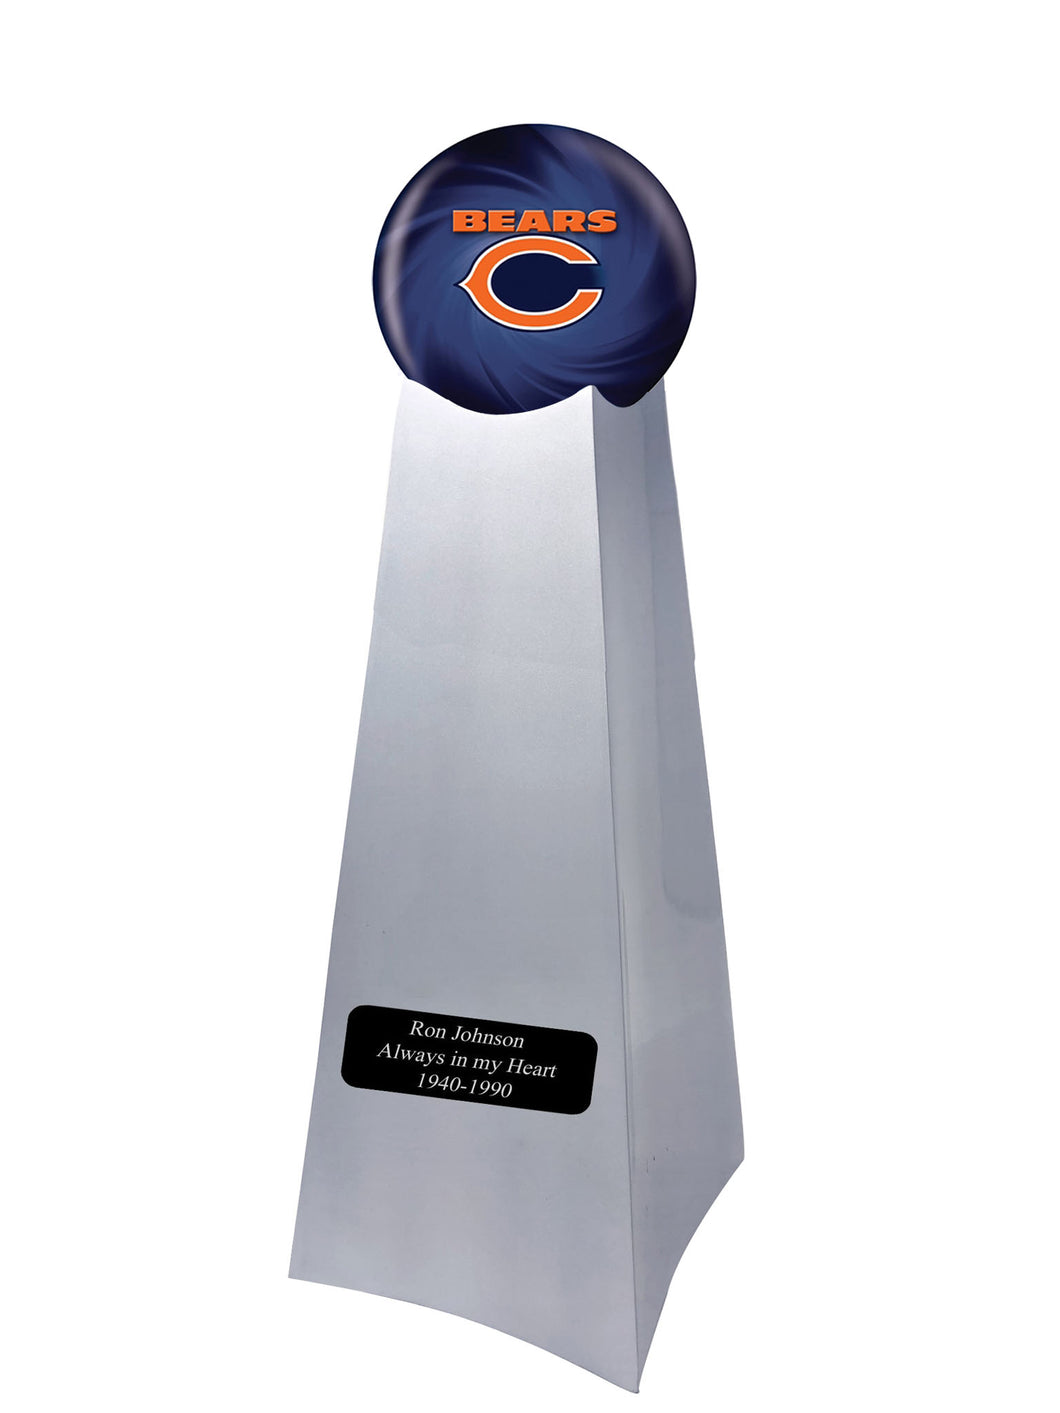 Championship Trophy Cremation Urn with Optional Chicago Bears Ball Decor and Custom Metal Plaque - Memorials4u